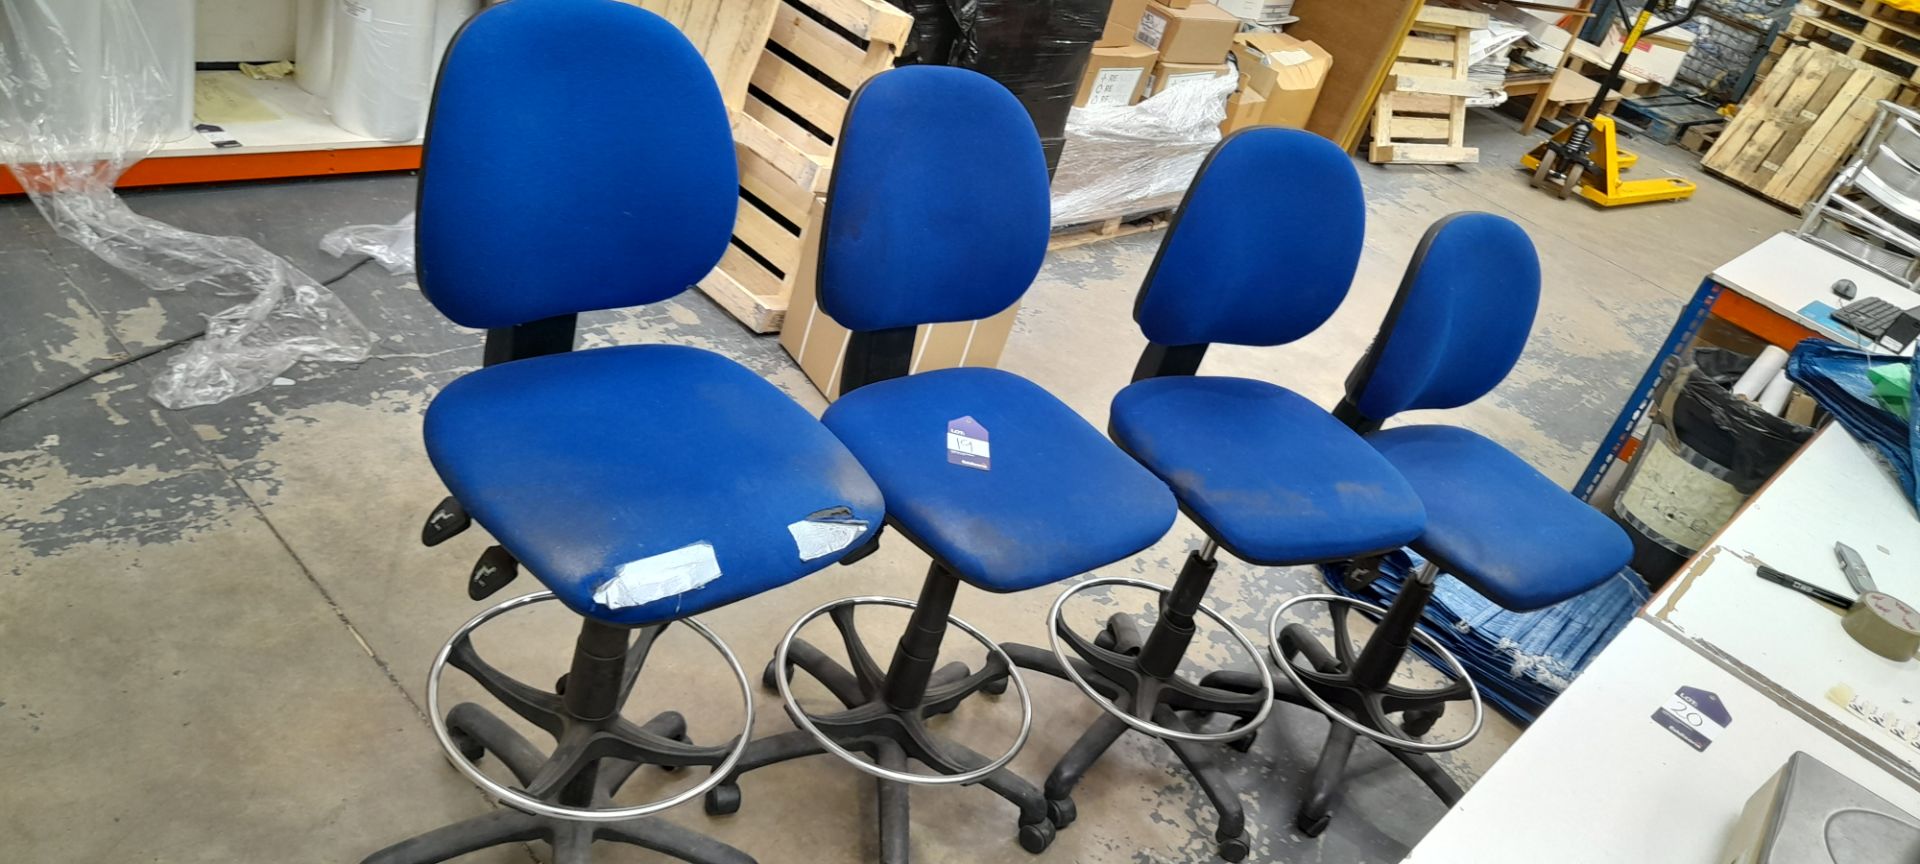 4x Tall mobile operators chairs - Image 2 of 2